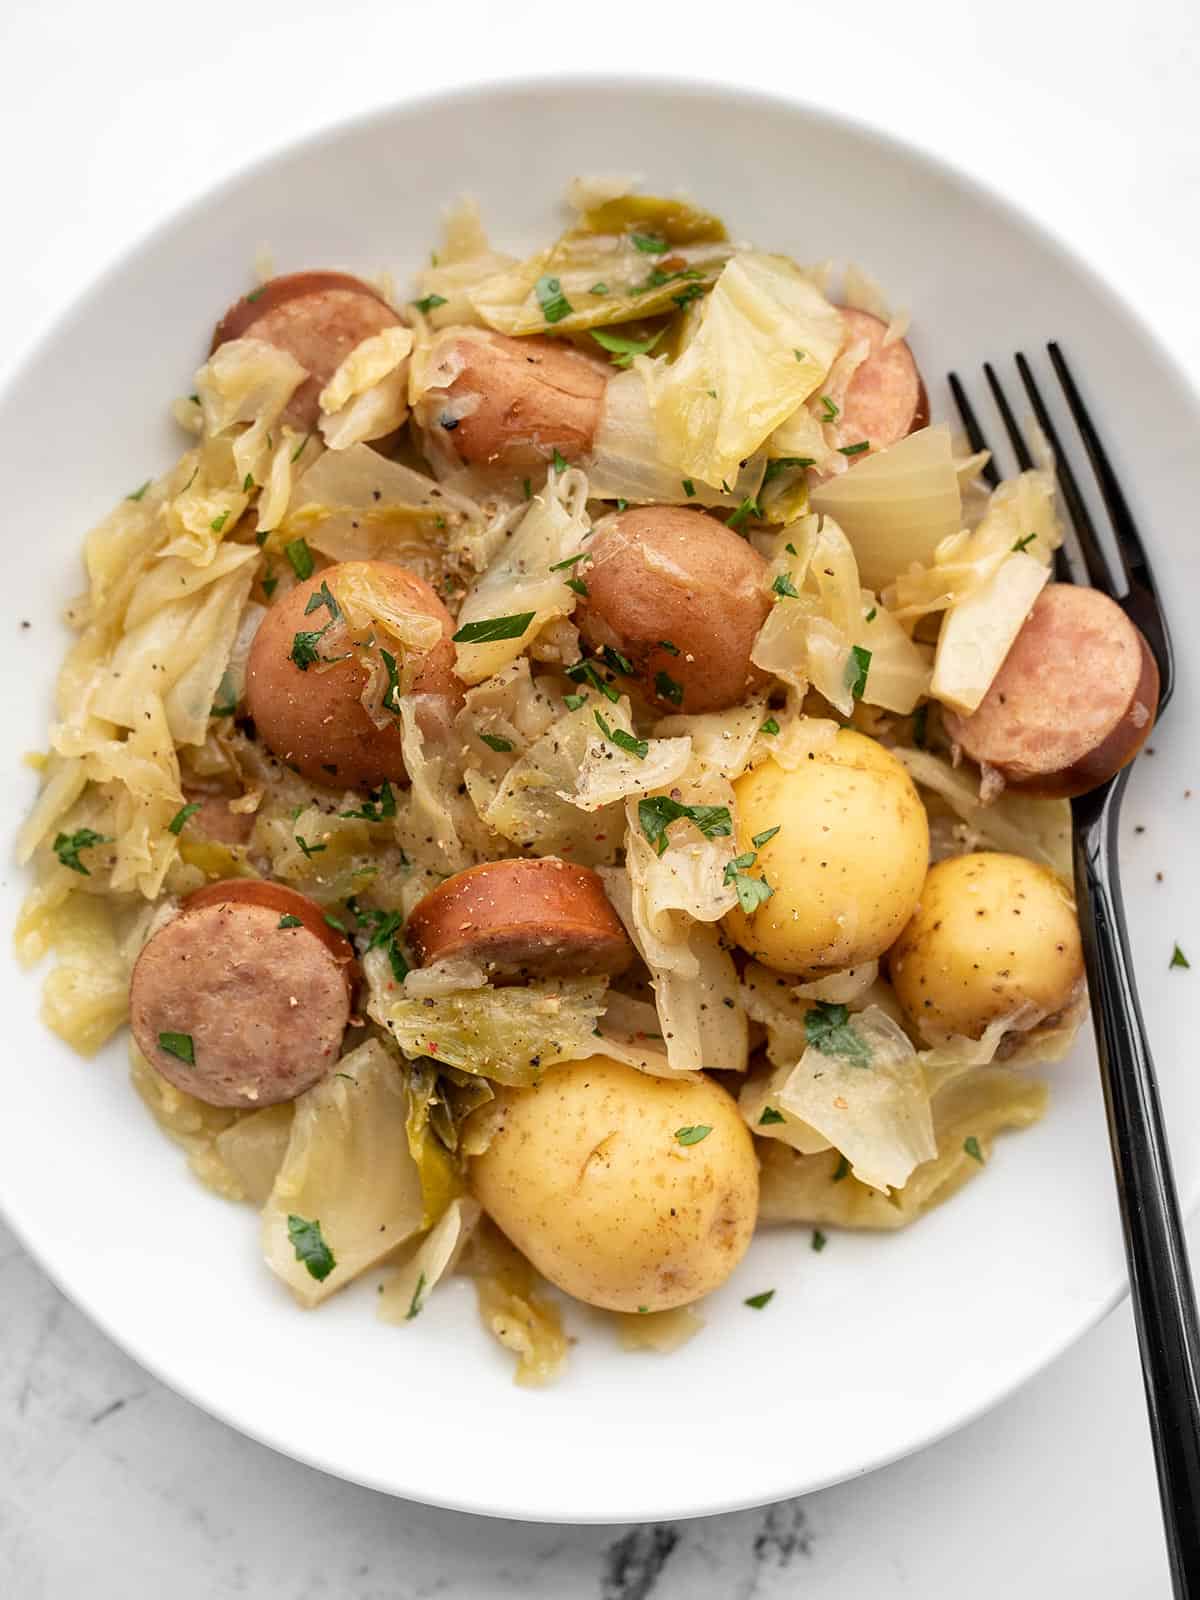 A shallow bowl full of slow cooker cabbage and sausage